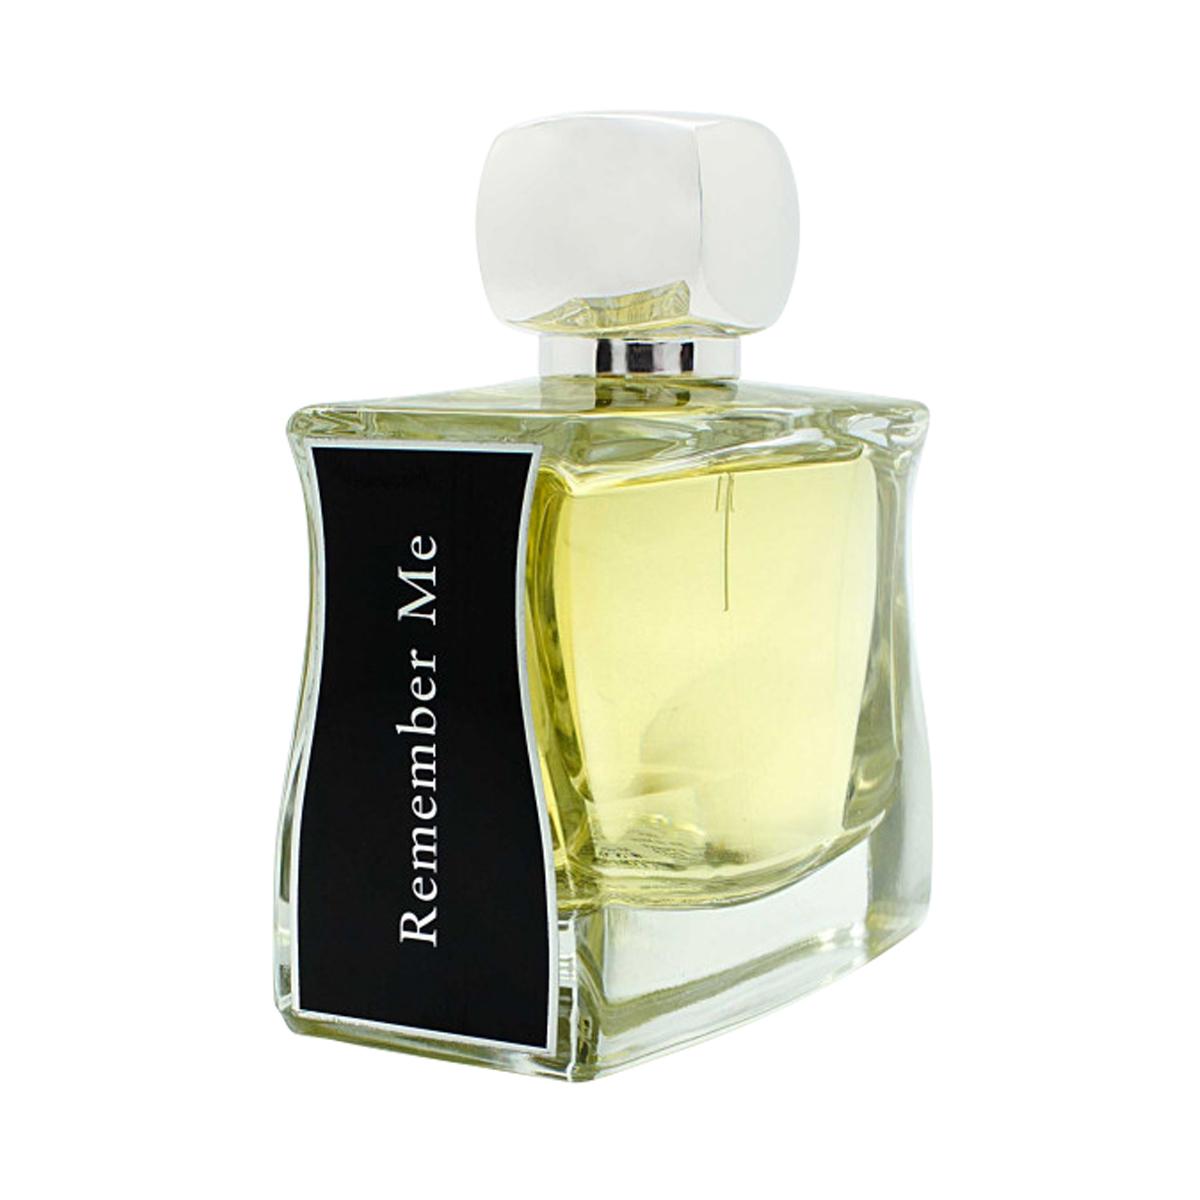 Primary image of Remember Me EDP